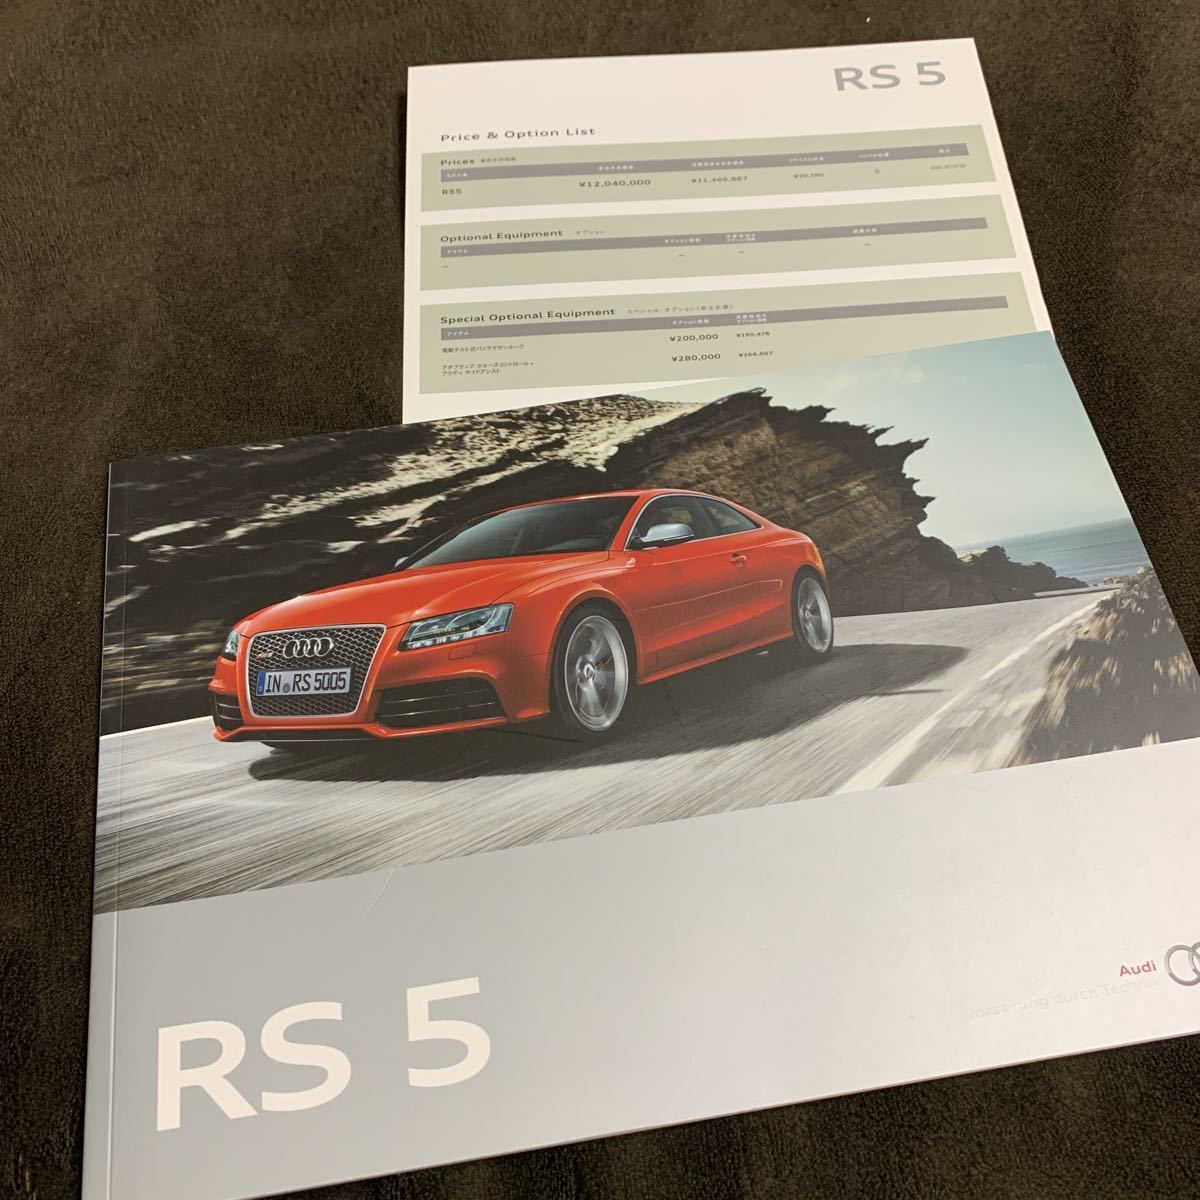 RS5 COUPEの値段と価格推移は？｜8件の売買データからRS5 COUPEの価値